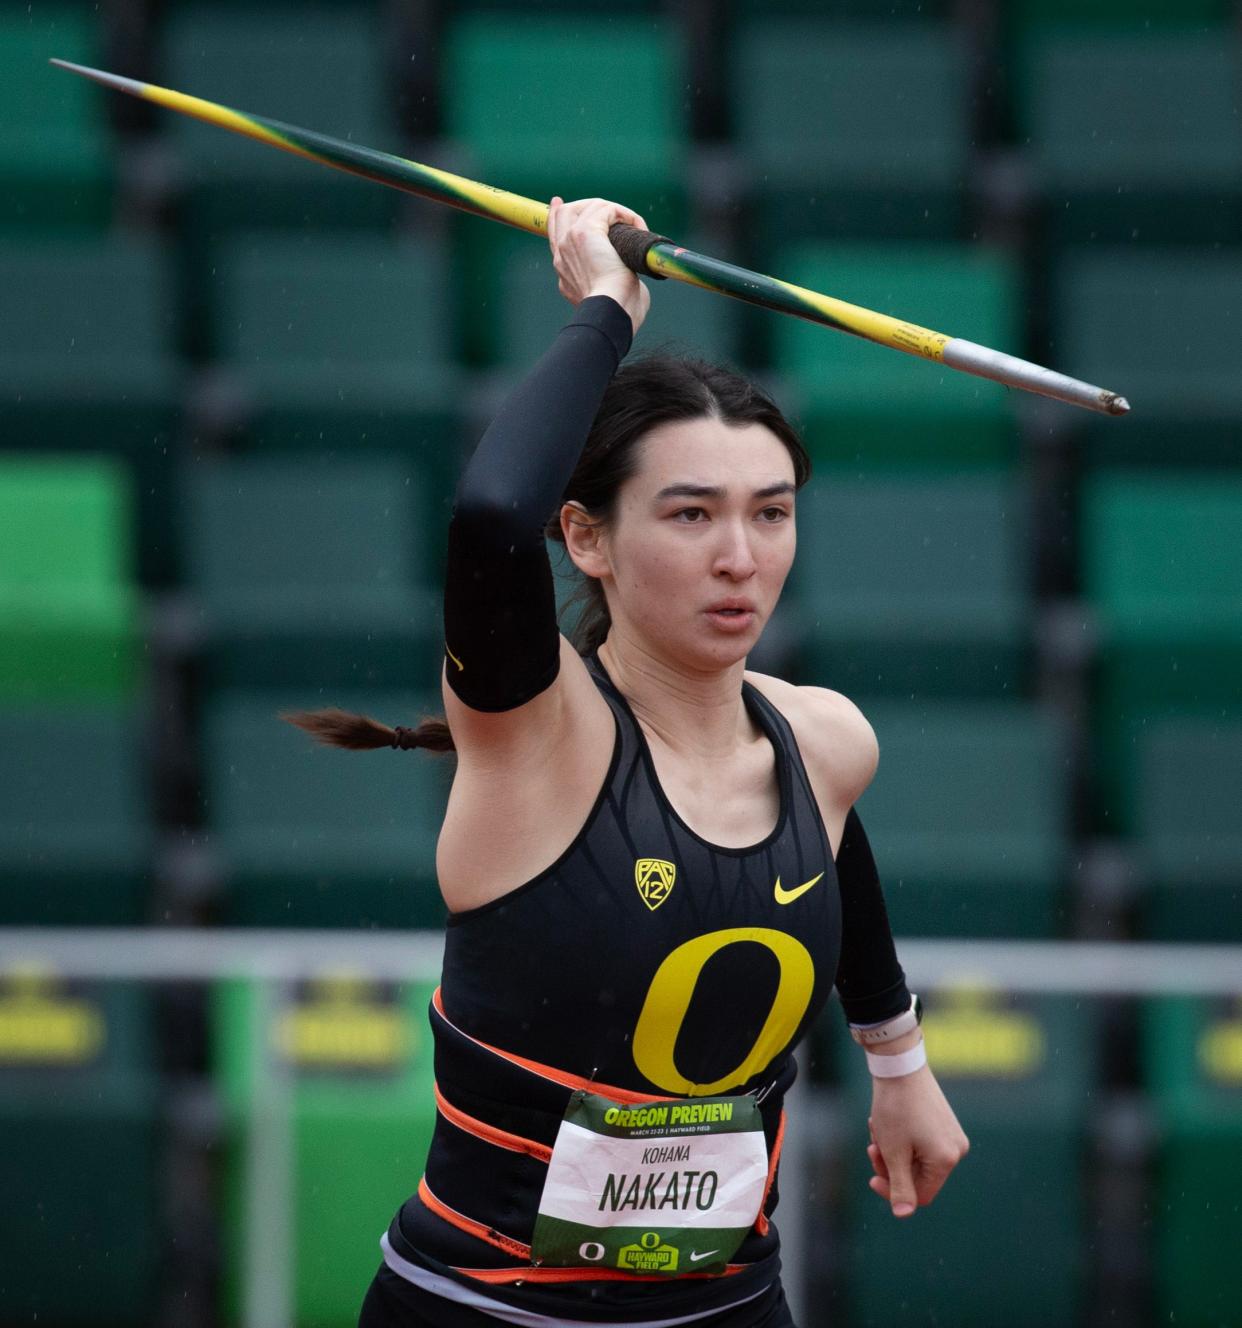 Oregon’s Kohana Nakato wins the women javelin throw at the Oregon Preview track and field meet at Hayward Field Friday, March 22, 2024 in Eugene, Oregon.